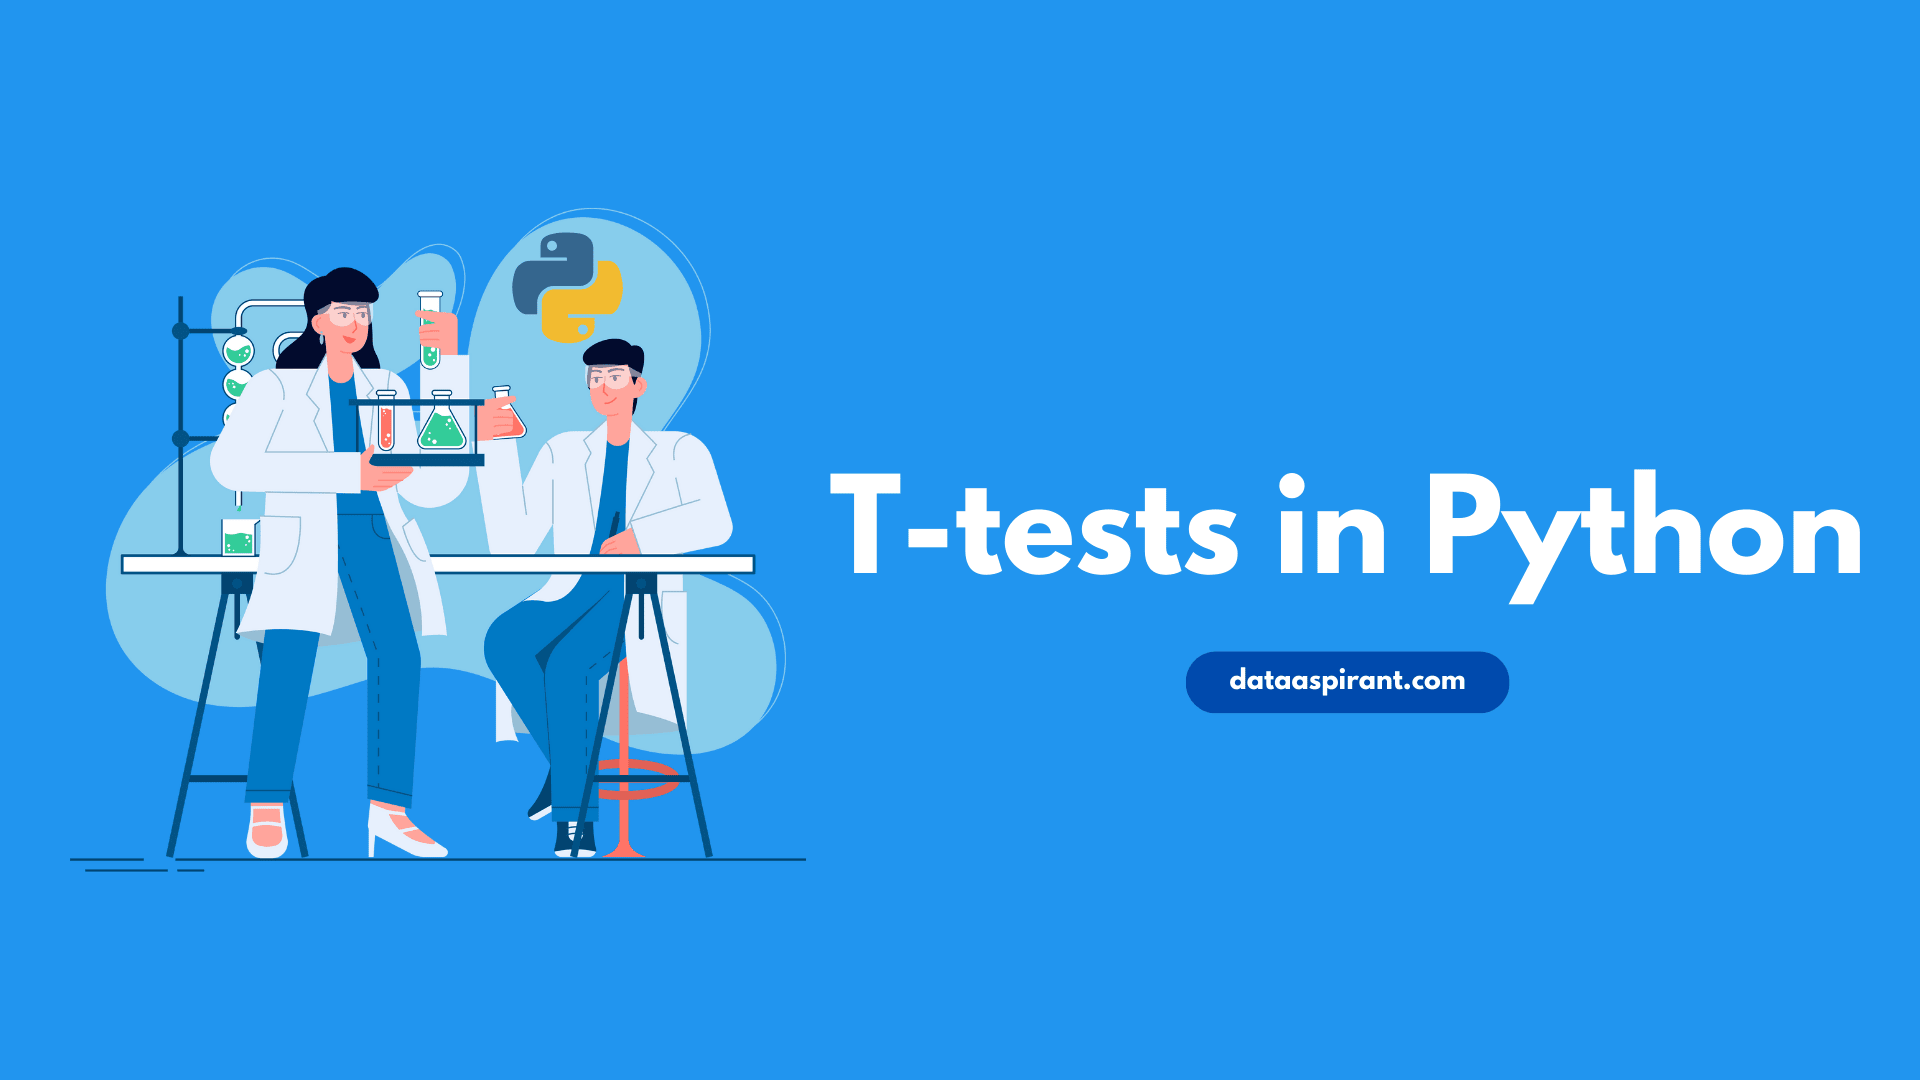 Step-by-step guide to conducting t-tests in Python